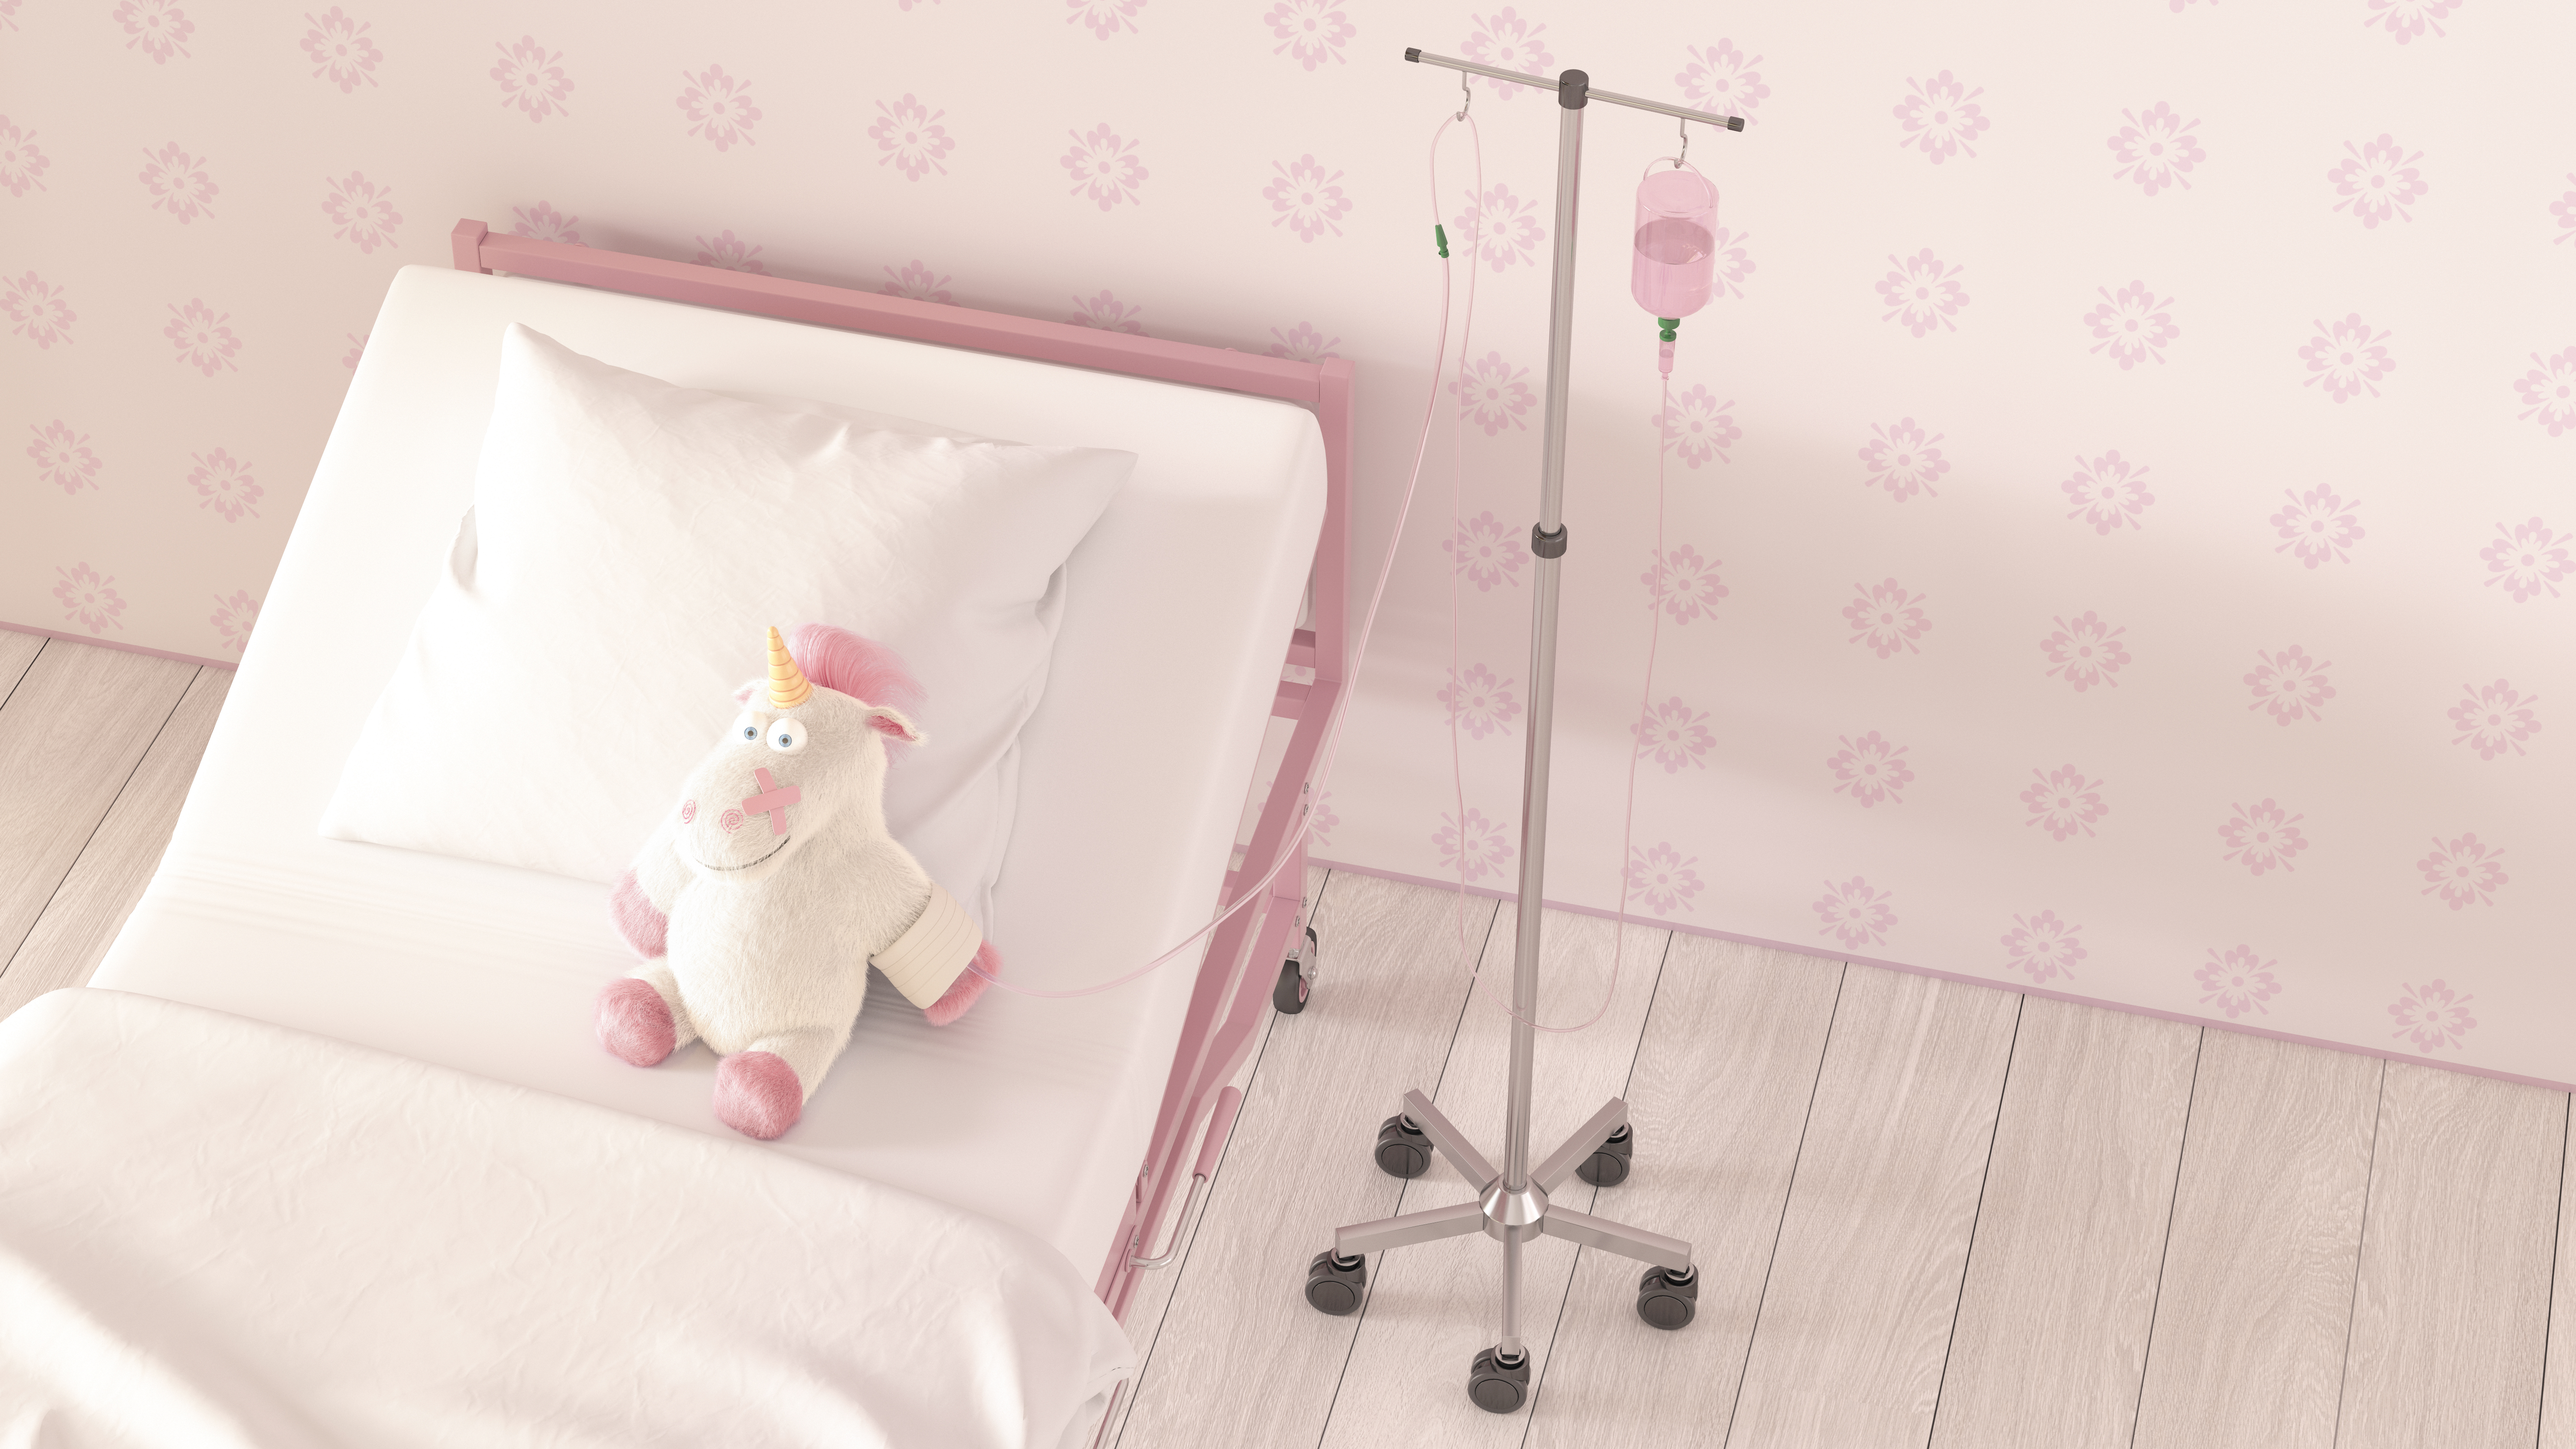 Image of a stuffed unicorn sitting in a hospital bed hooked up to an IV